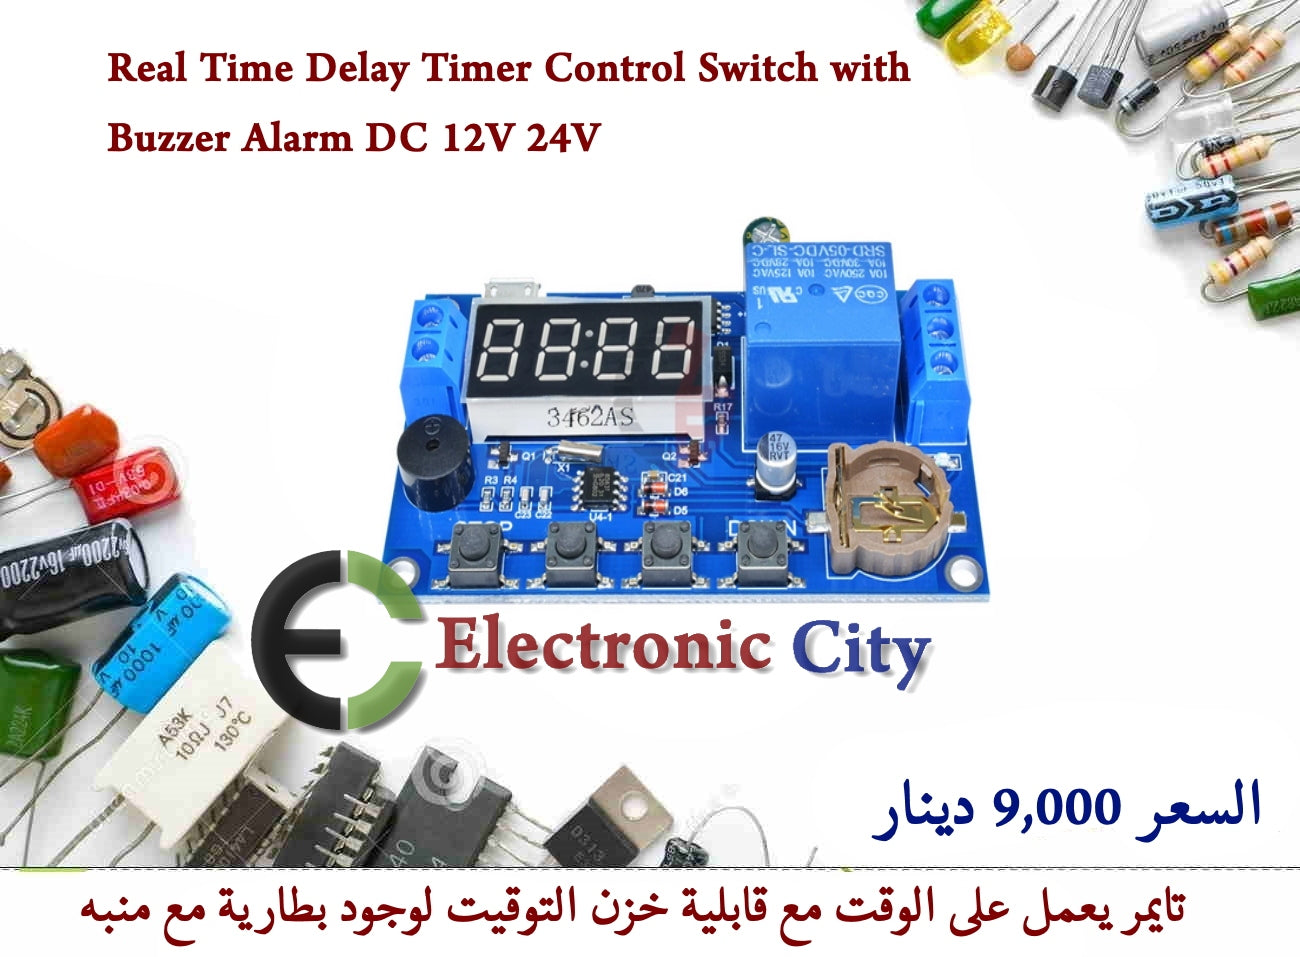 Real Time Delay Timer Control Switch with Buzzer Alarm DC 12V 24V